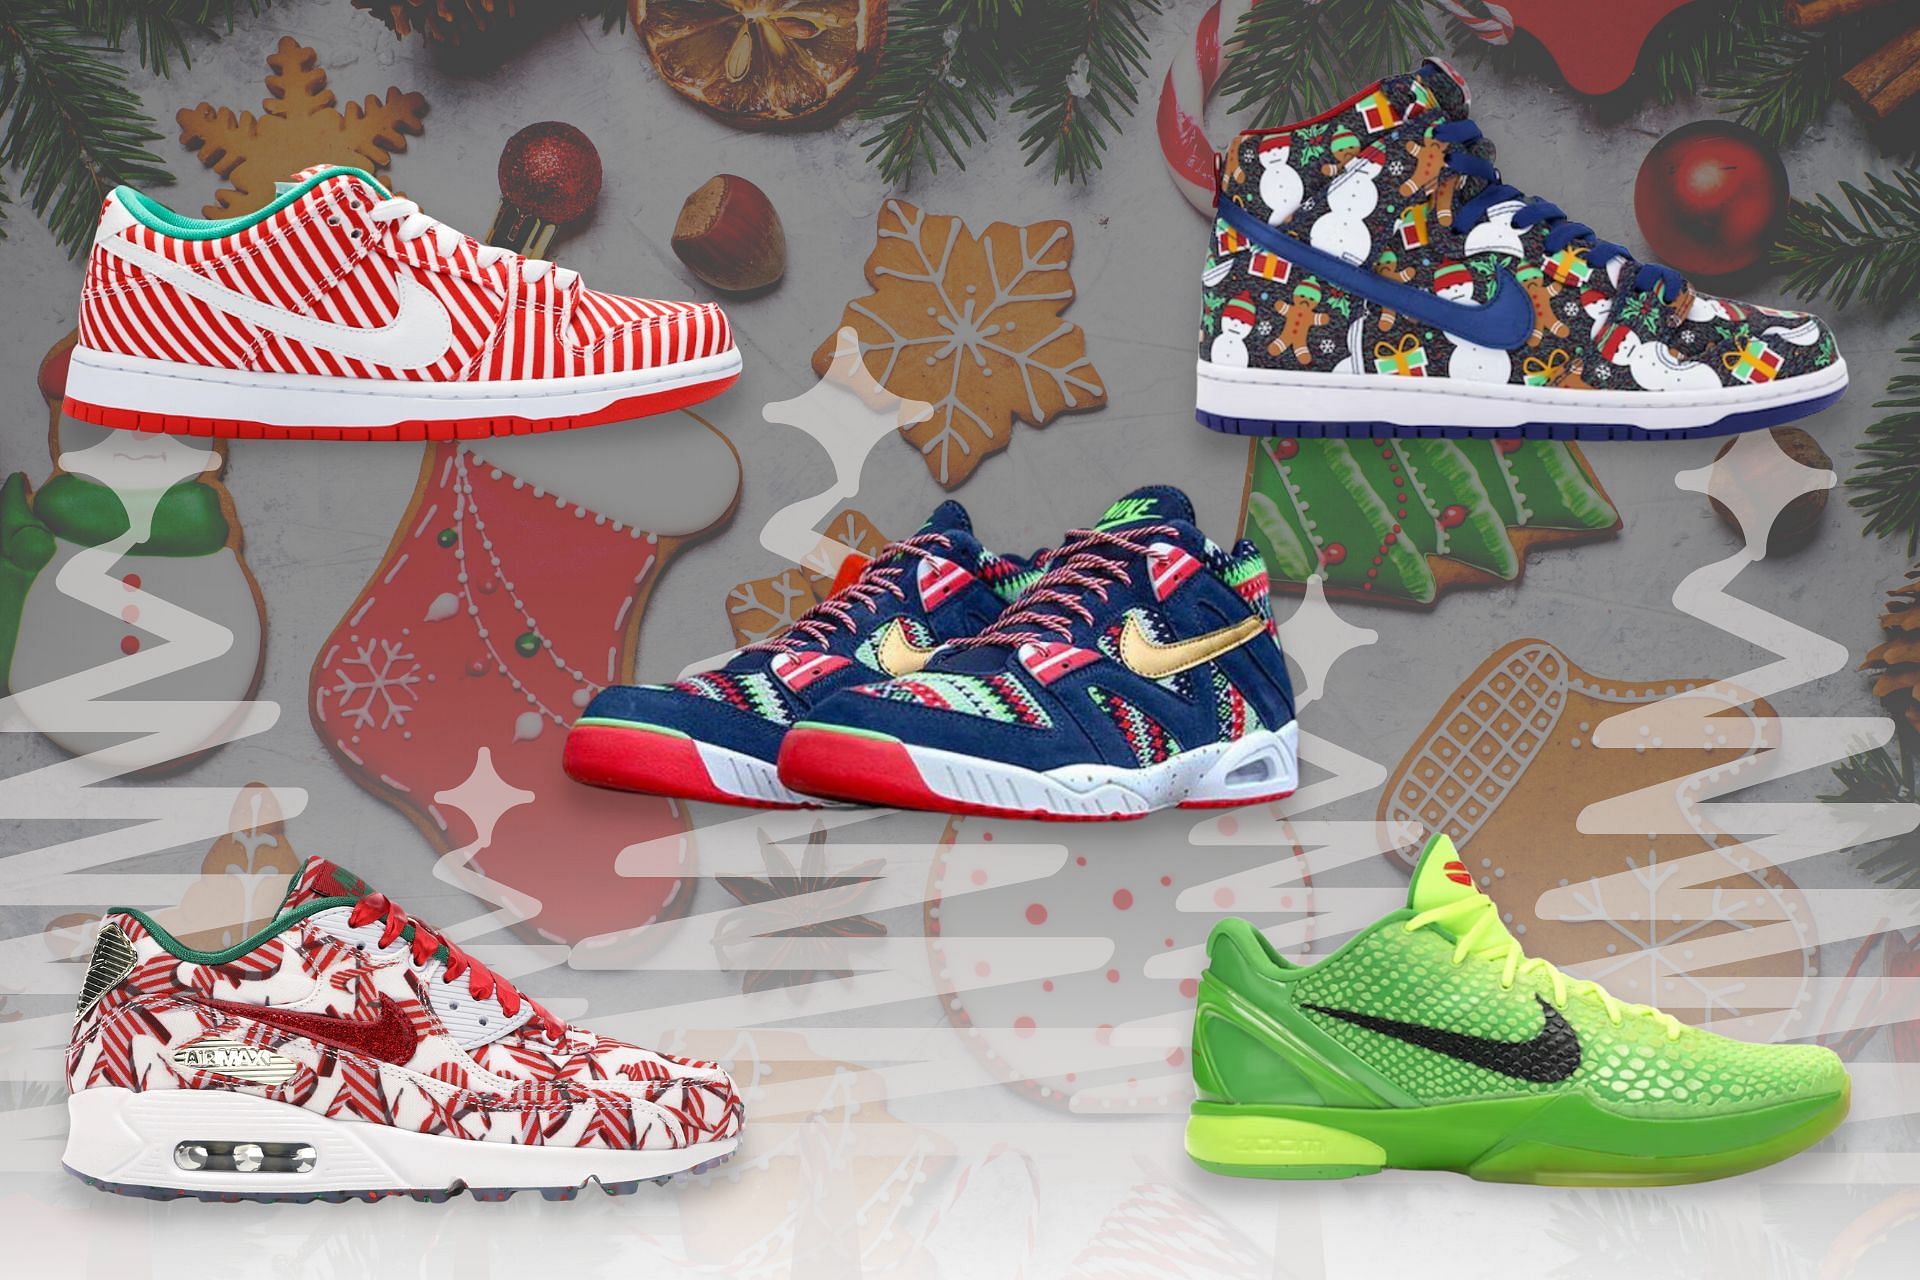 5 best Christmasthemed Nike sneakers of all time